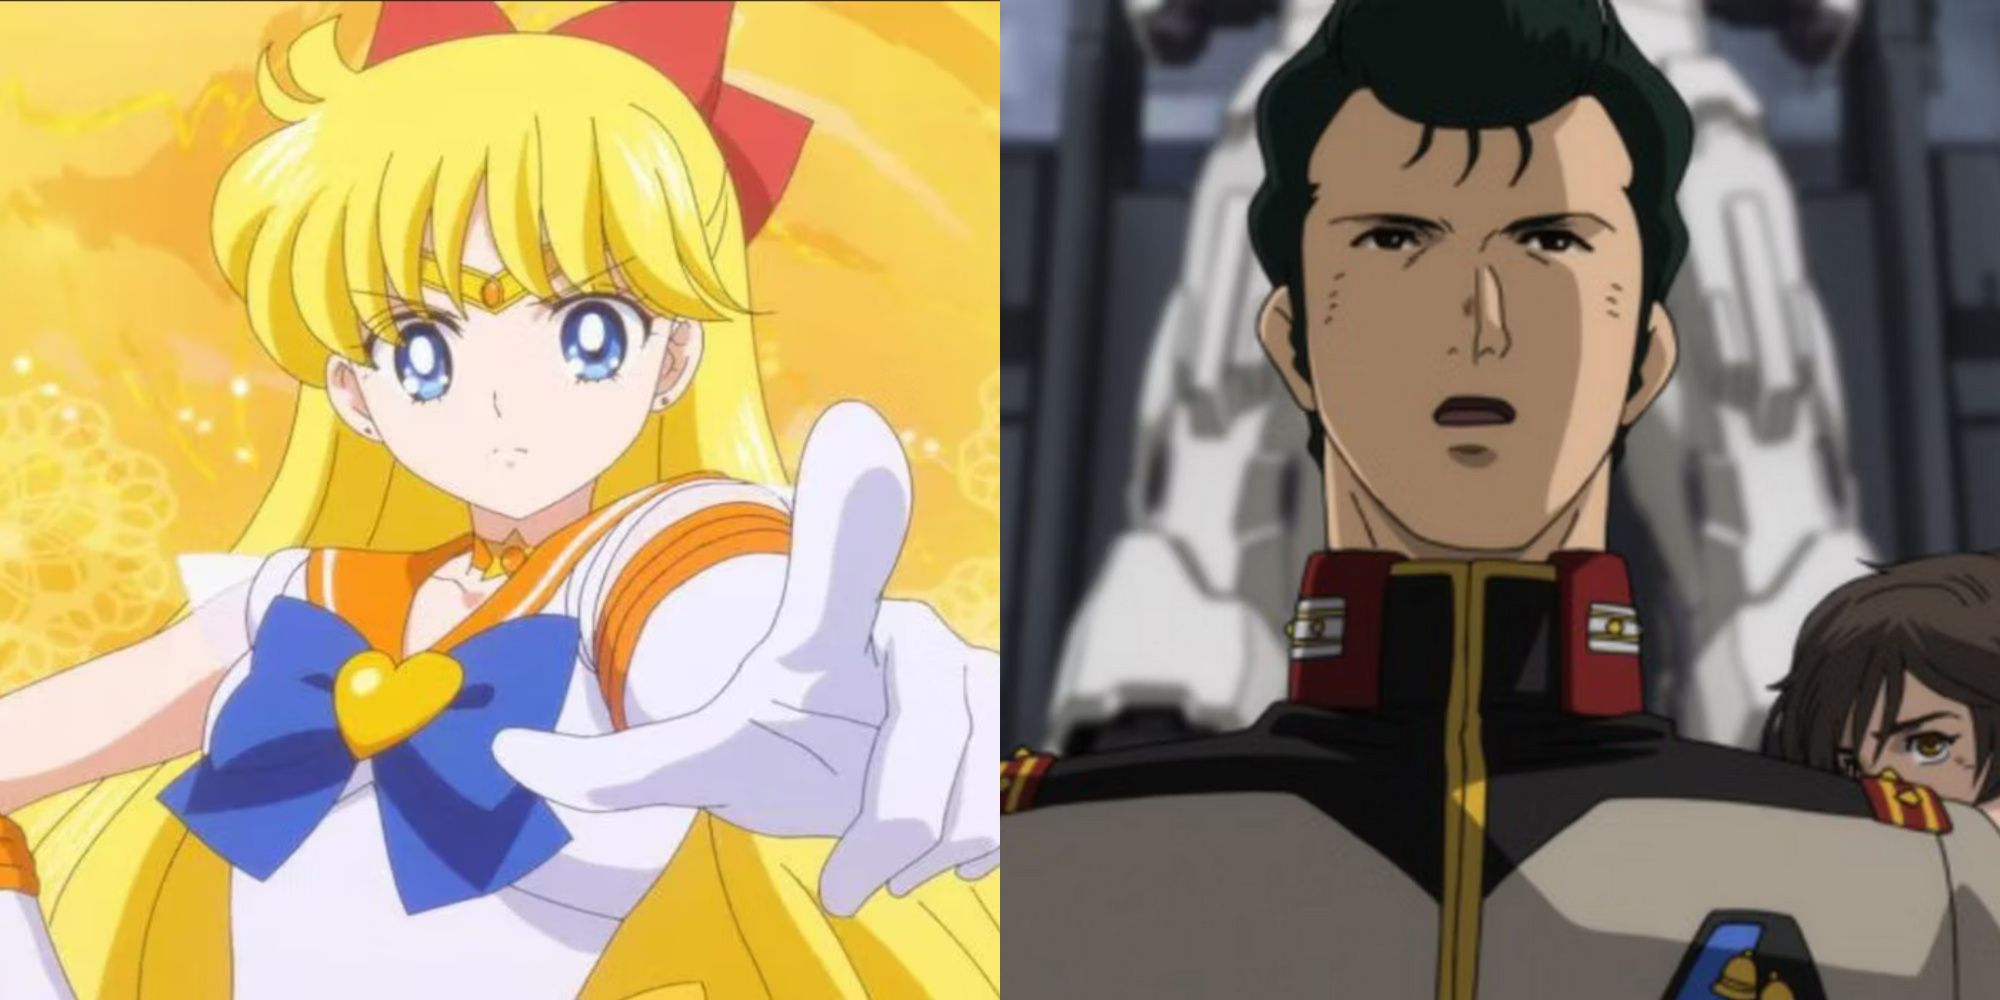 10 Most Respected Anime Leaders, Ranked